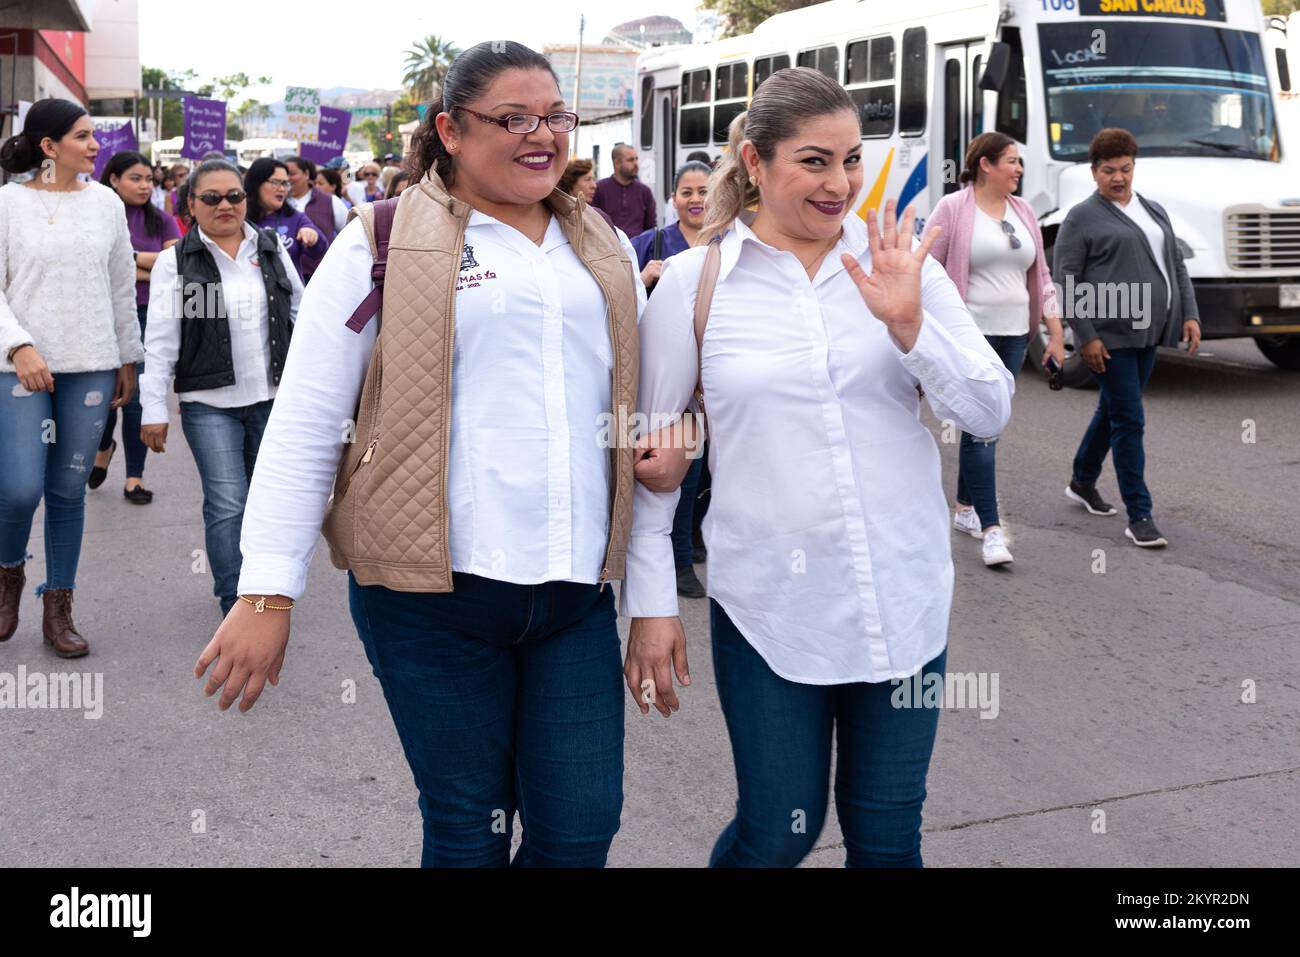 Two young females walking arm in arm in a march to protest violence against women stop to pose and wave, Guaymas, Mexico. Stock Photo